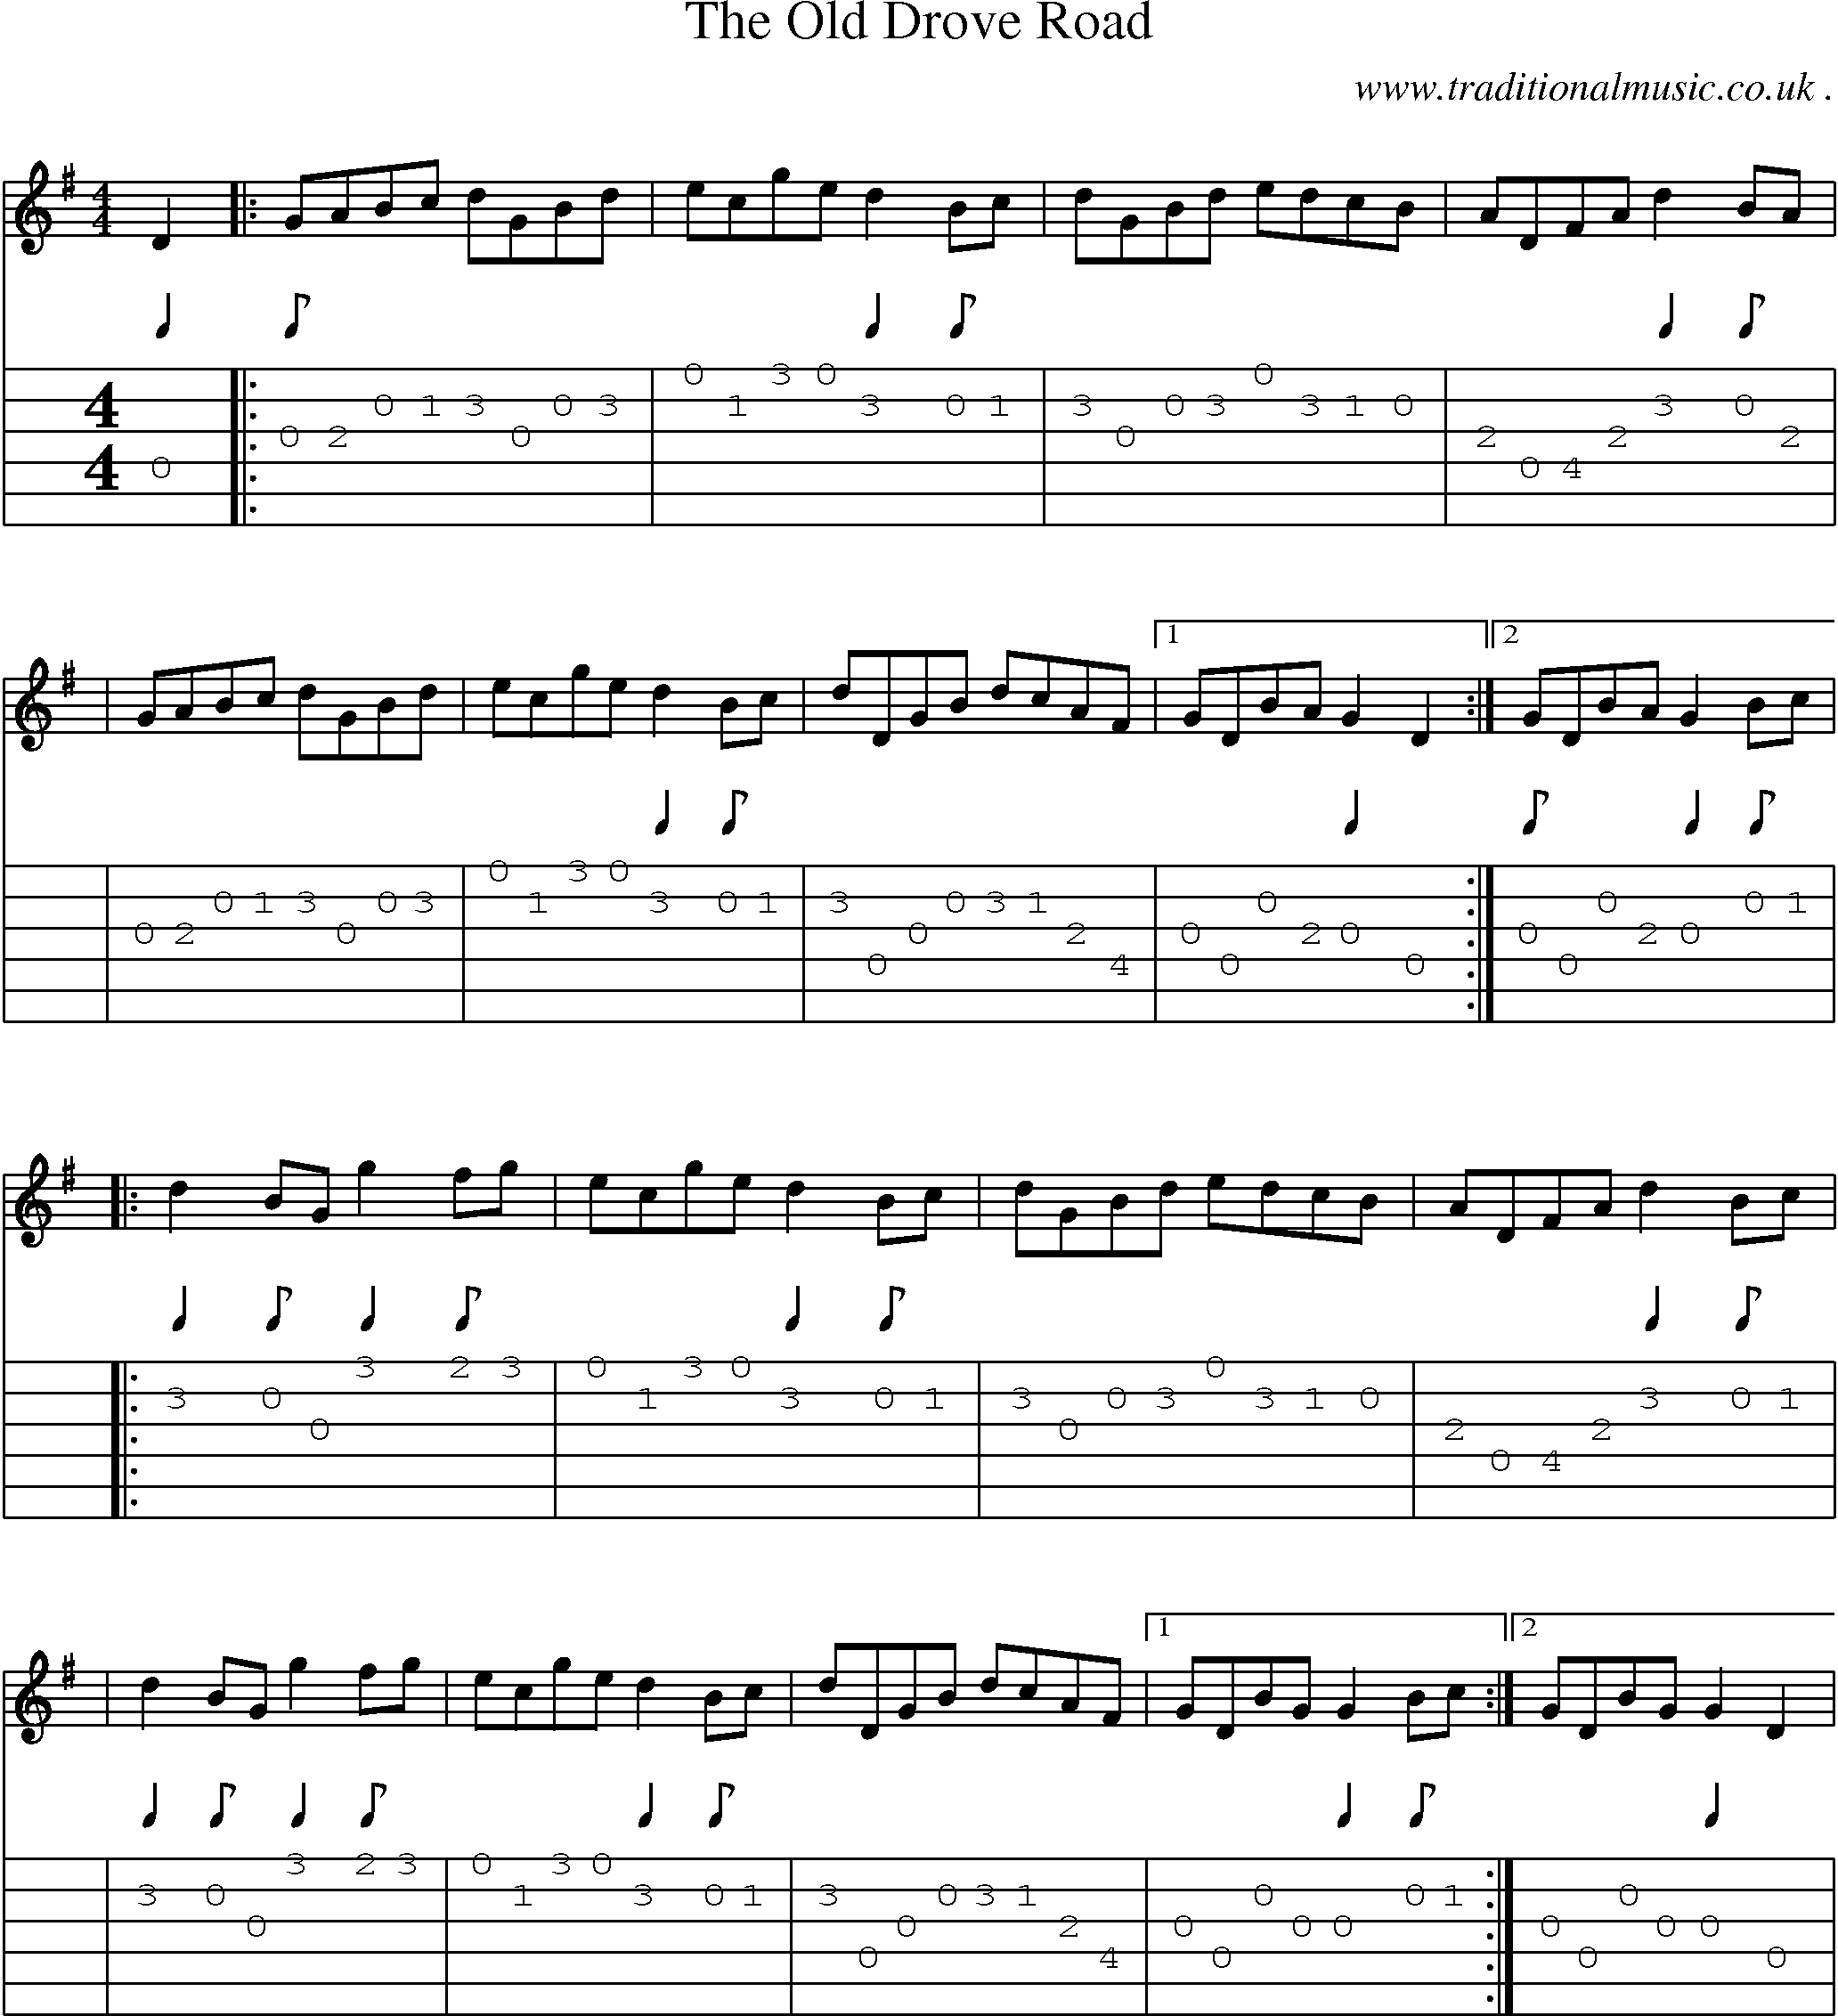 Sheet-Music and Guitar Tabs for The Old Drove Road